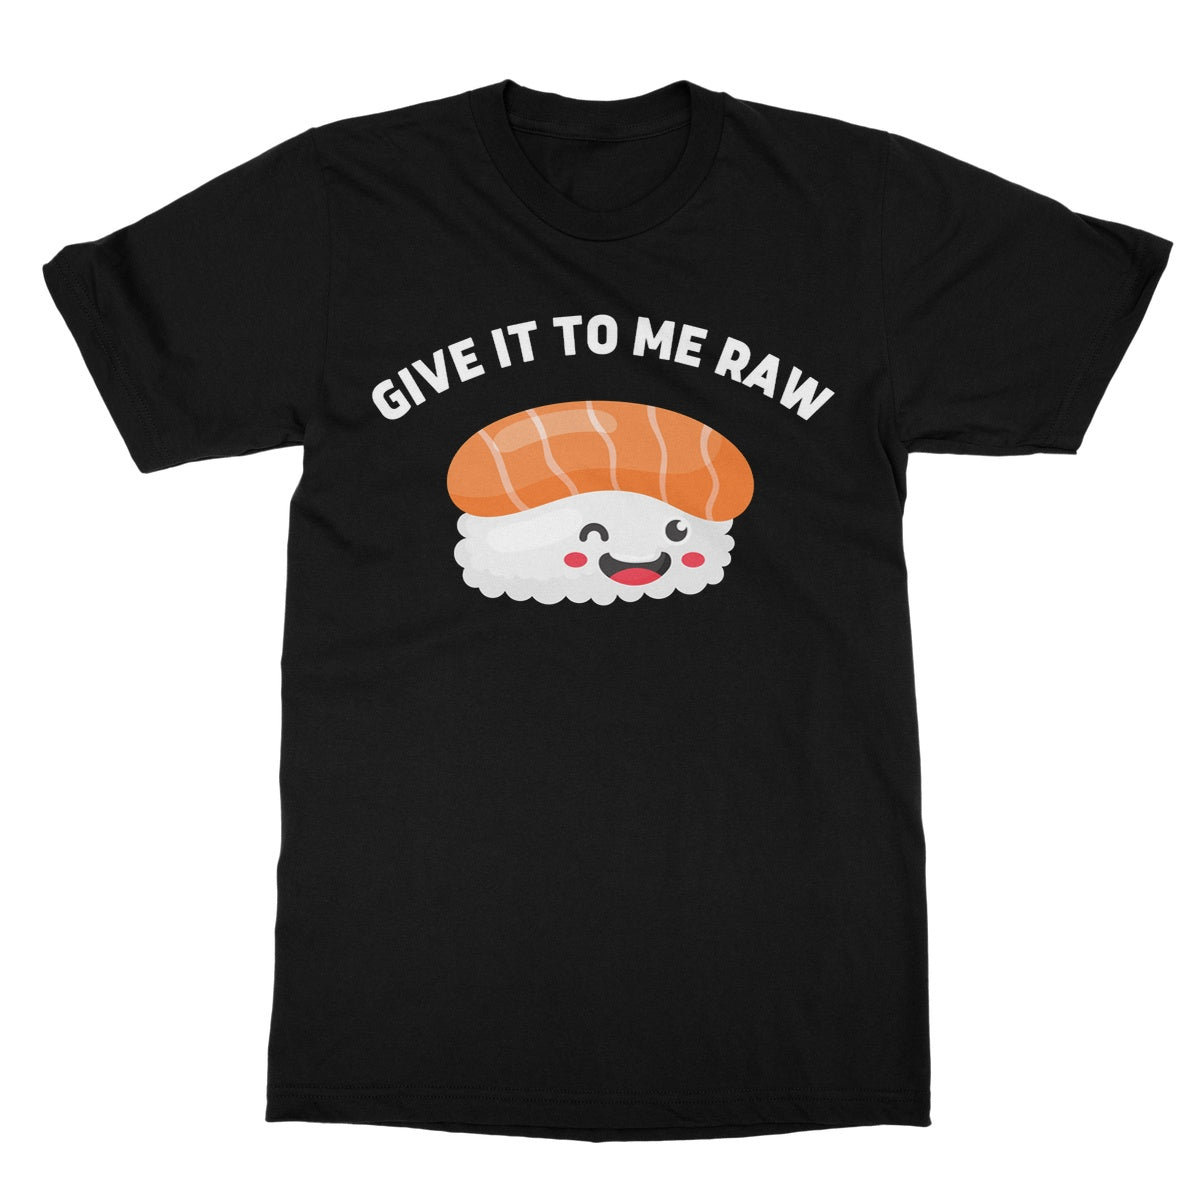 give it to me raw t shirt black